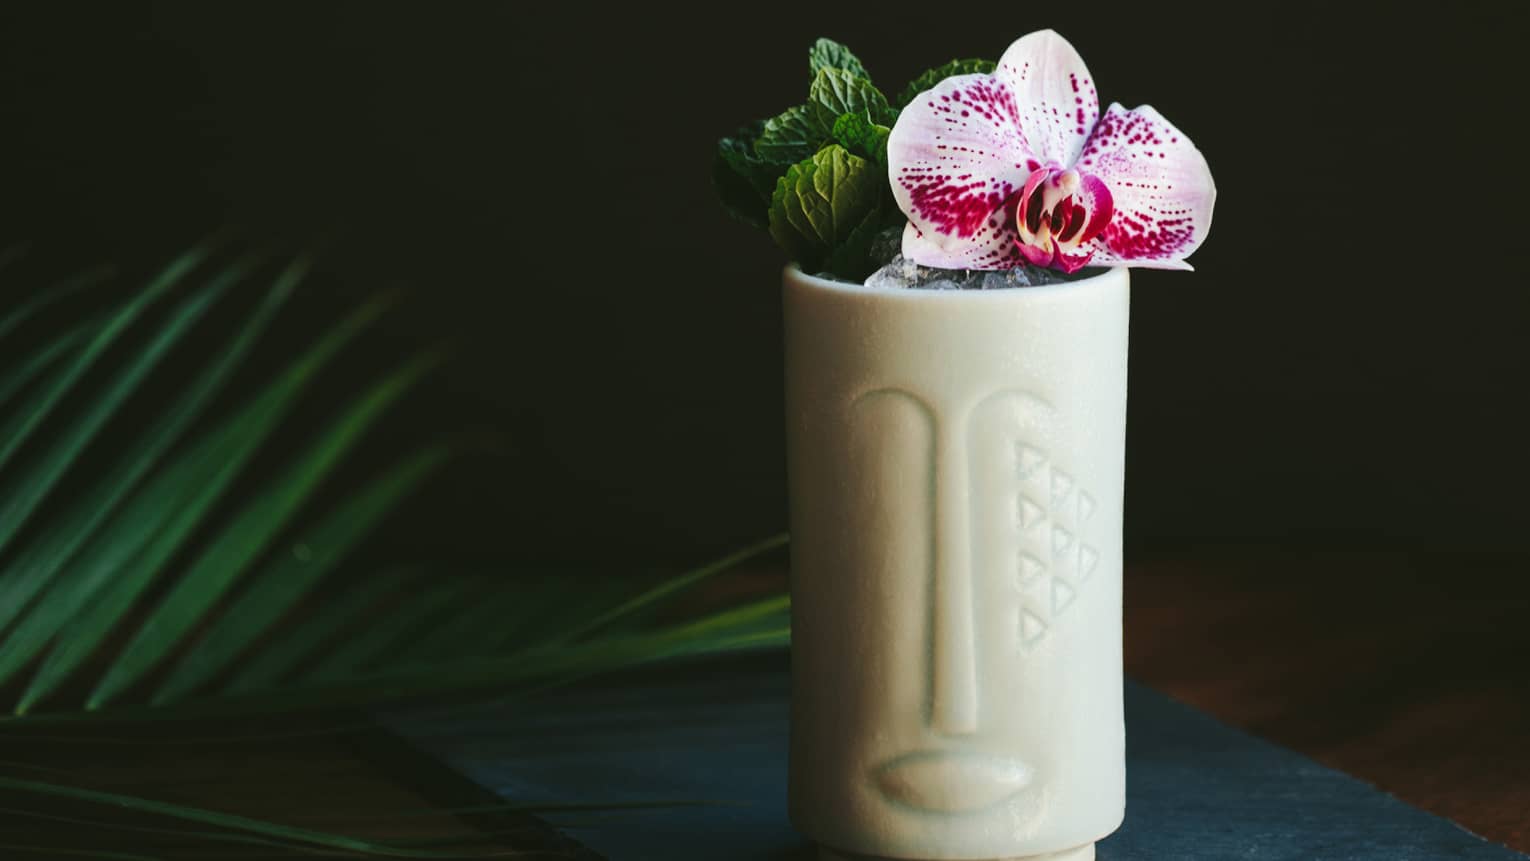 The Talisman cocktail in a tiki shaped glass with fresh flowers as a garnish